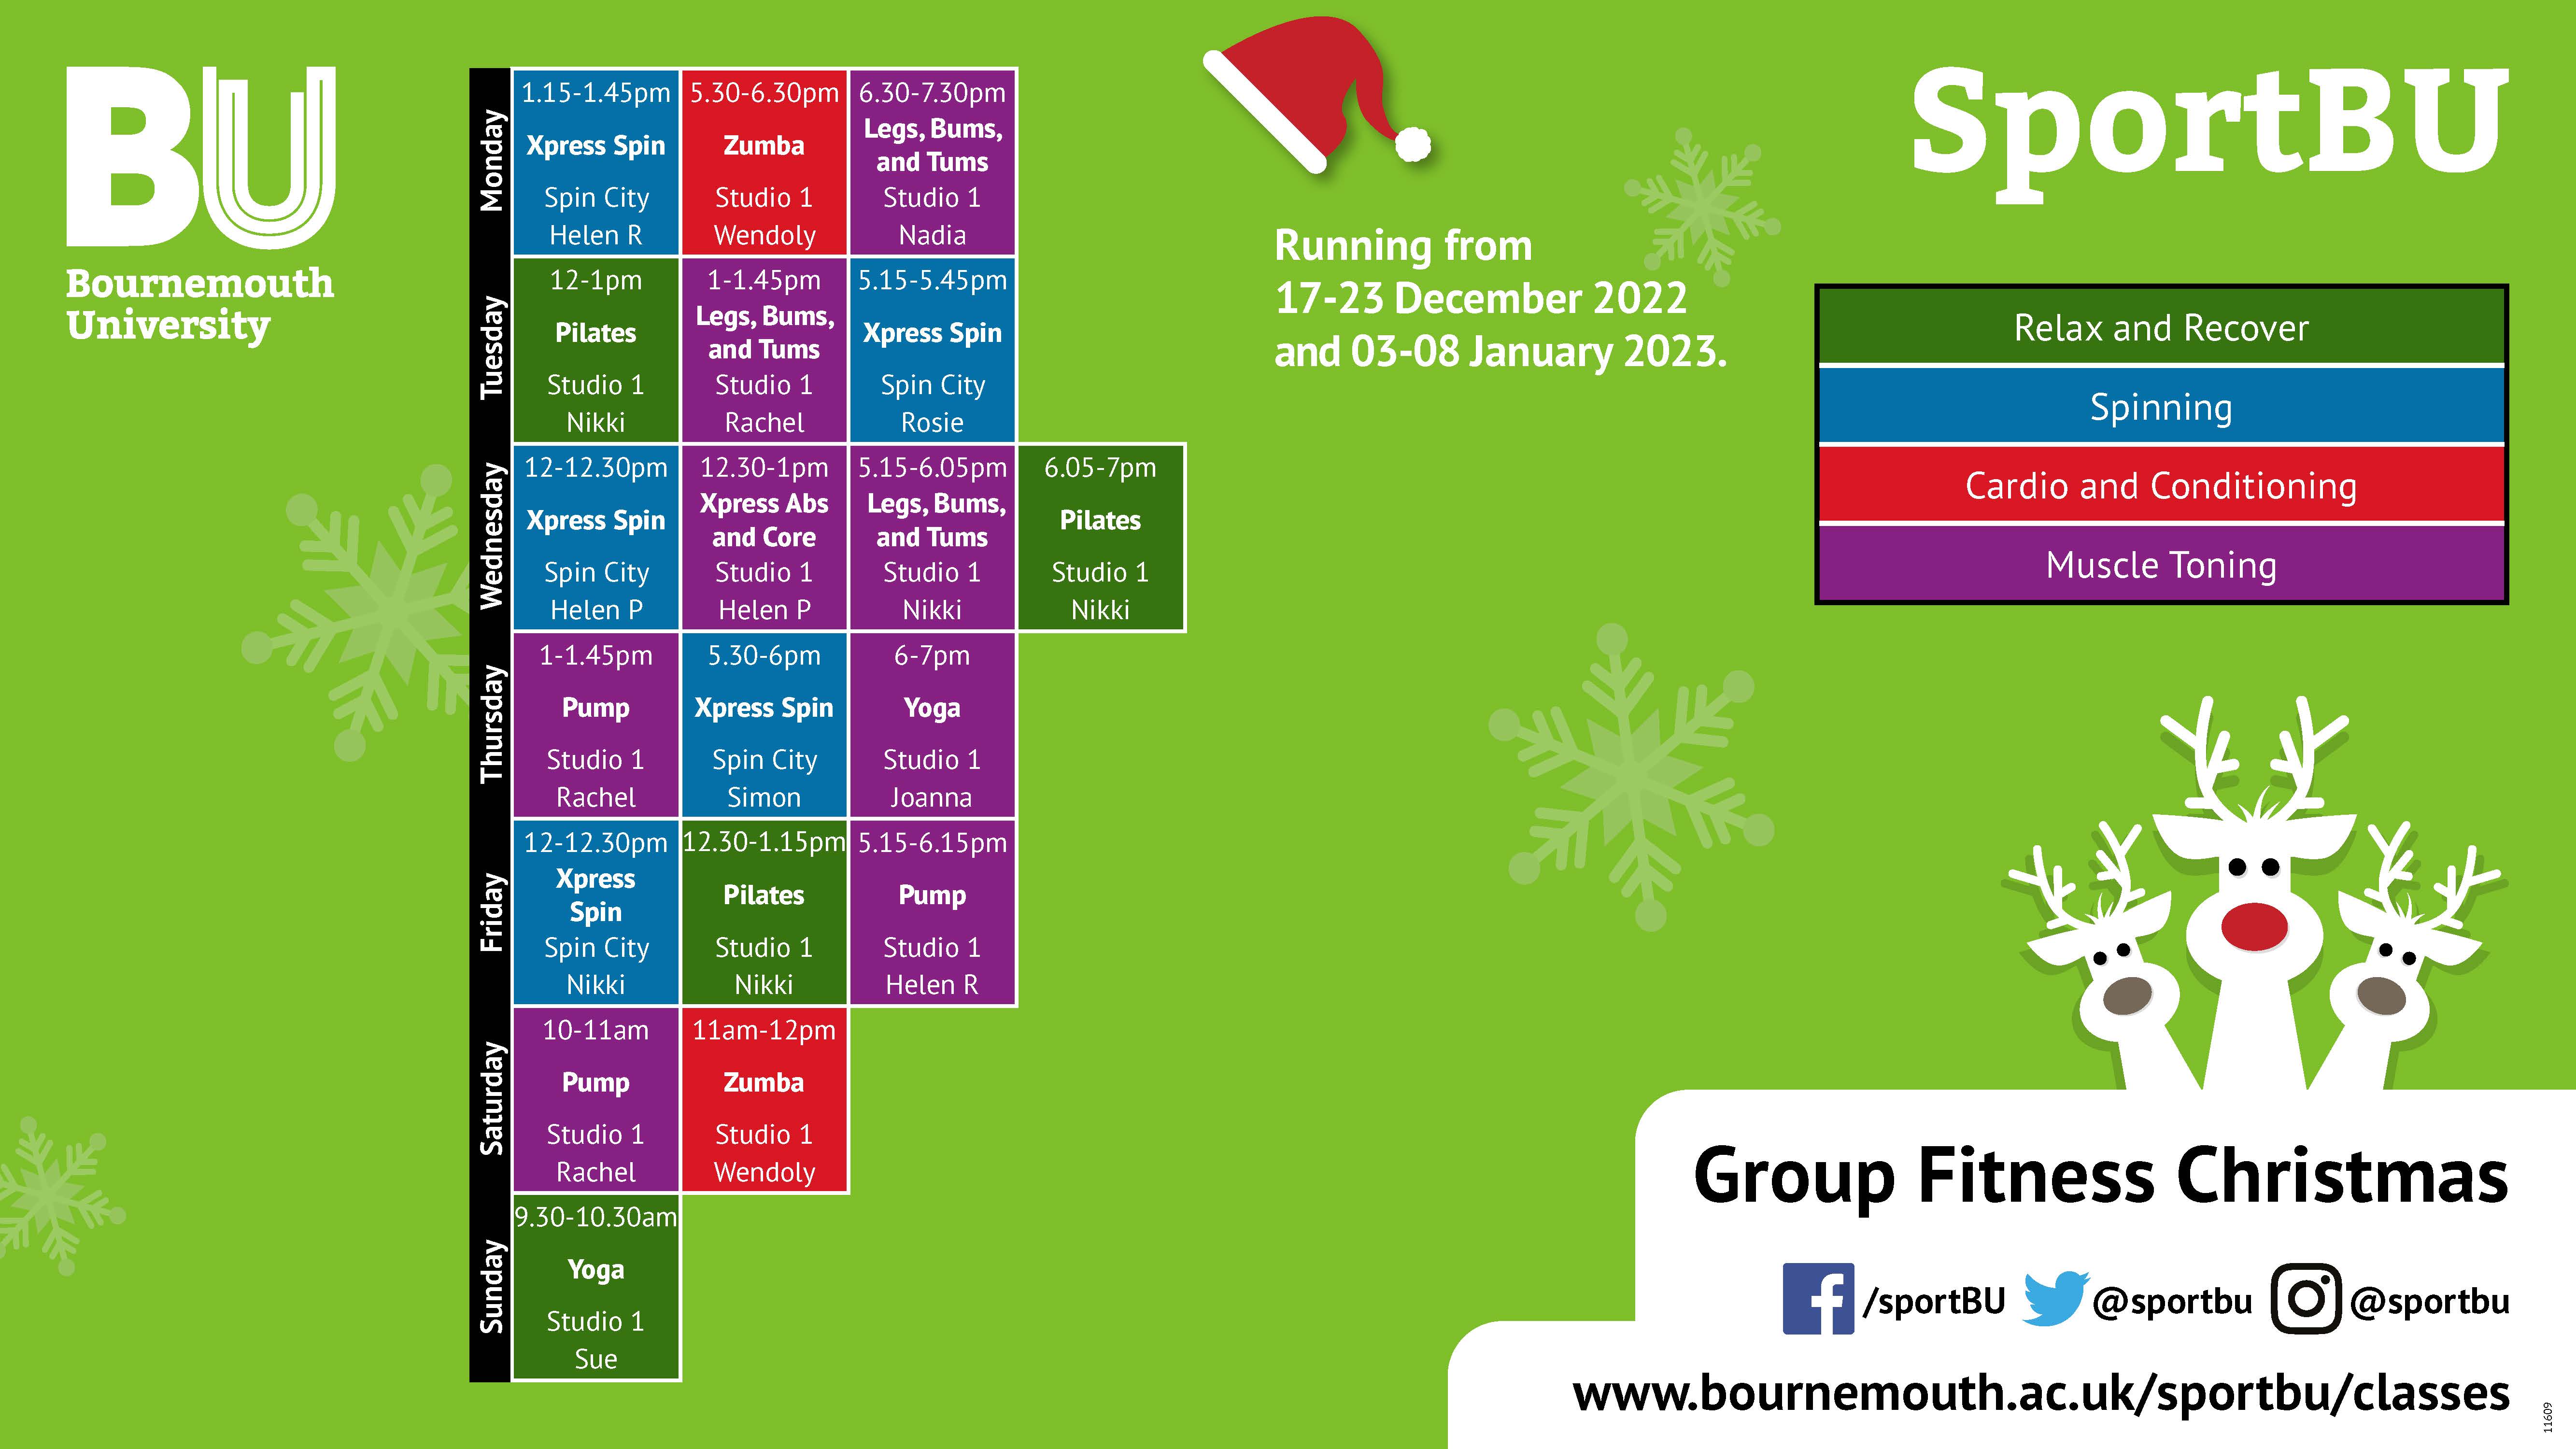 Group Fitness Timetable 2022